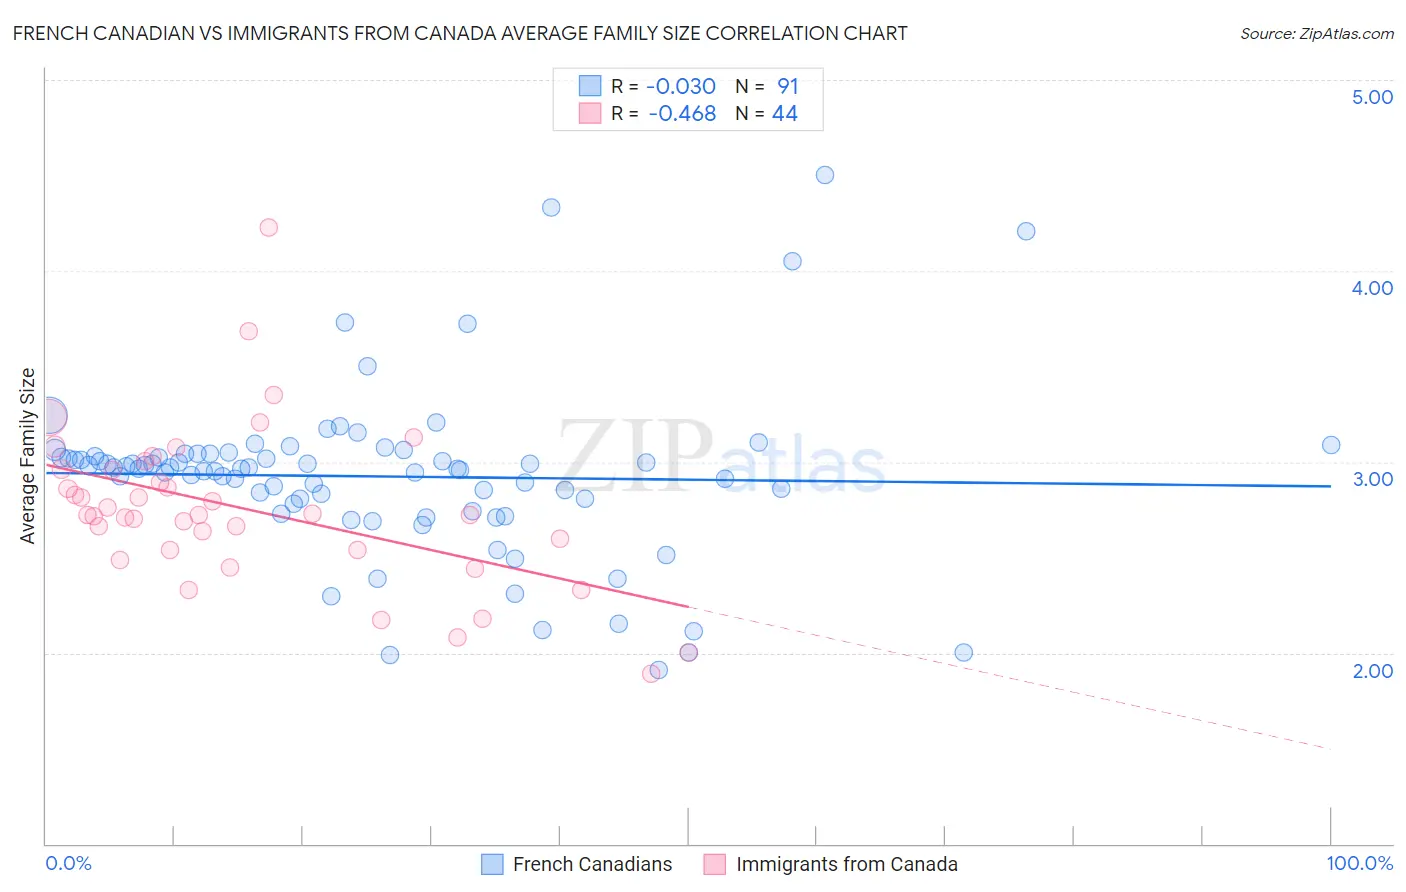 French Canadian vs Immigrants from Canada Average Family Size